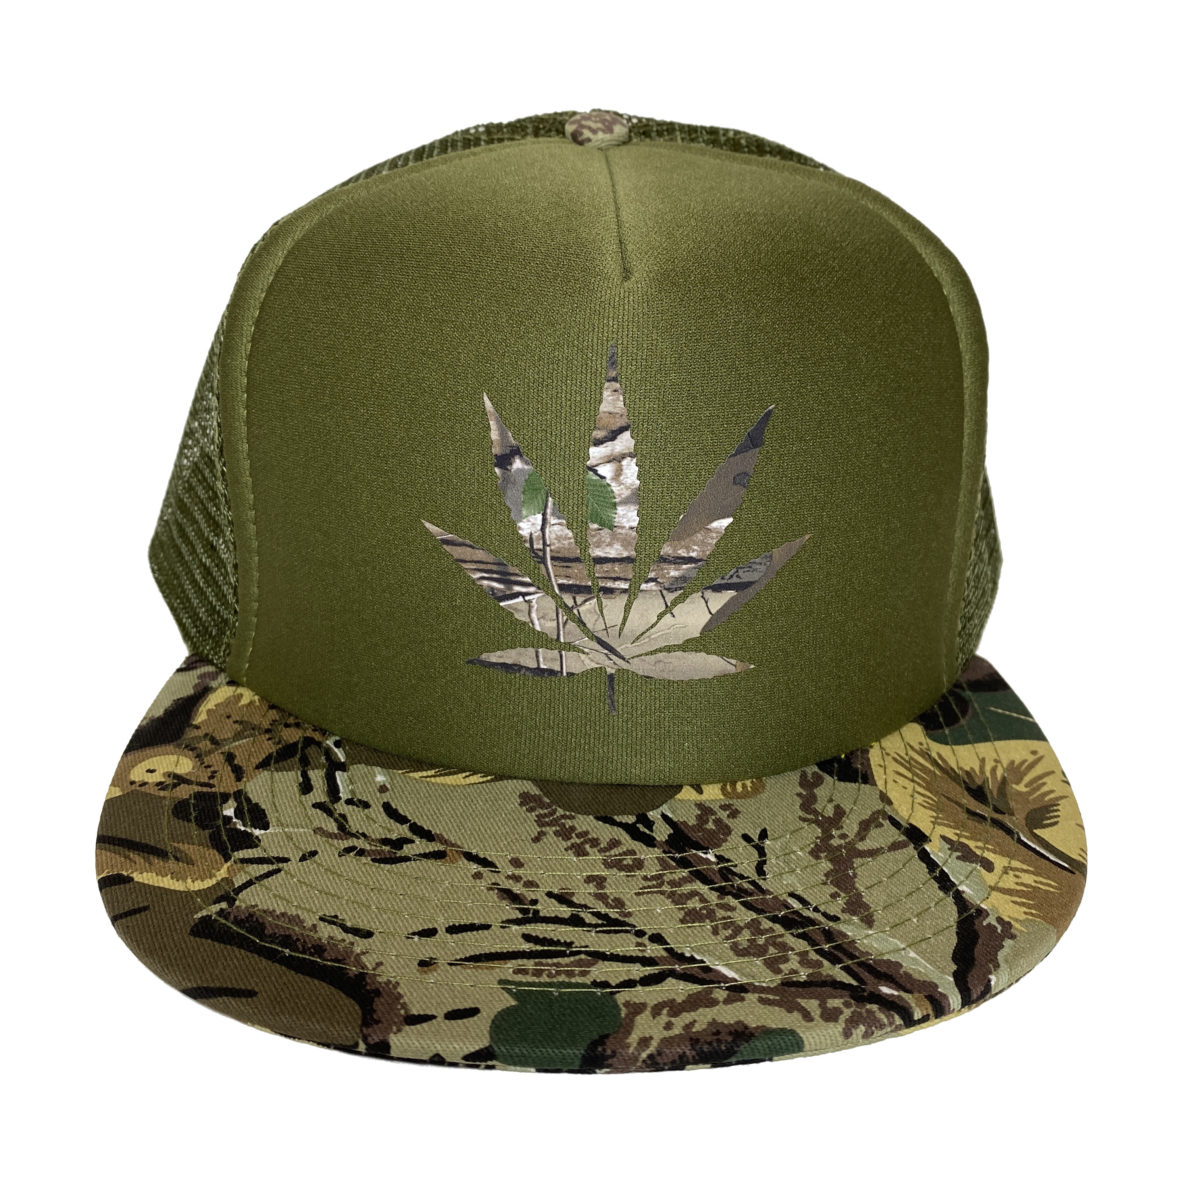 Leaf_2_Trucker_hat_Camo_on_Camo_front_view